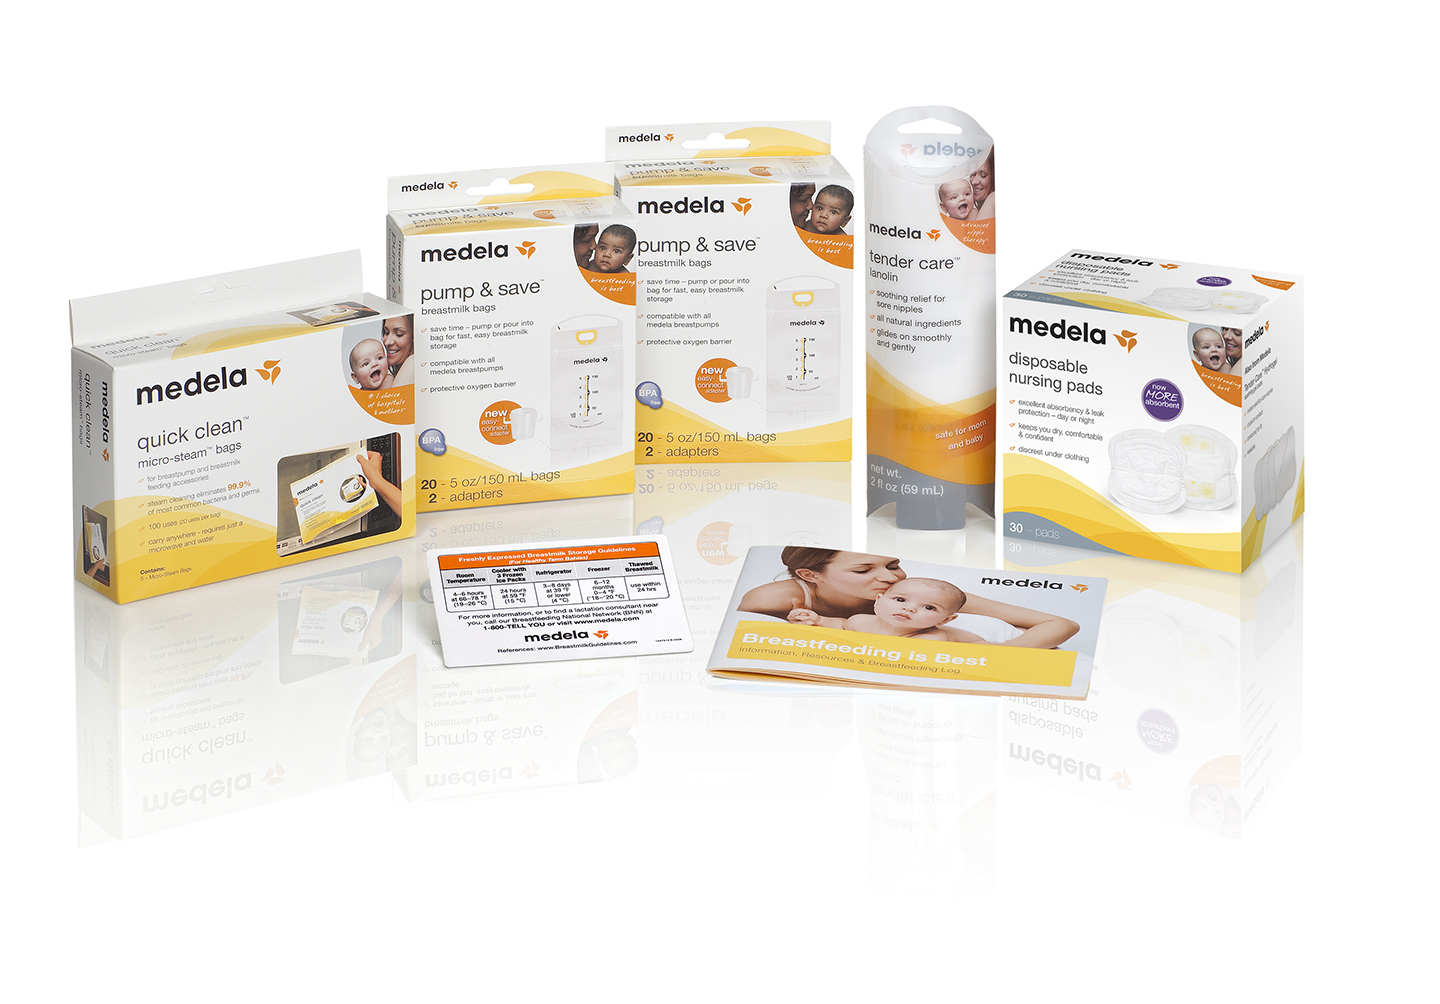 Medela Quick Clean Breast Pump and Accessories Wipes 24count - For